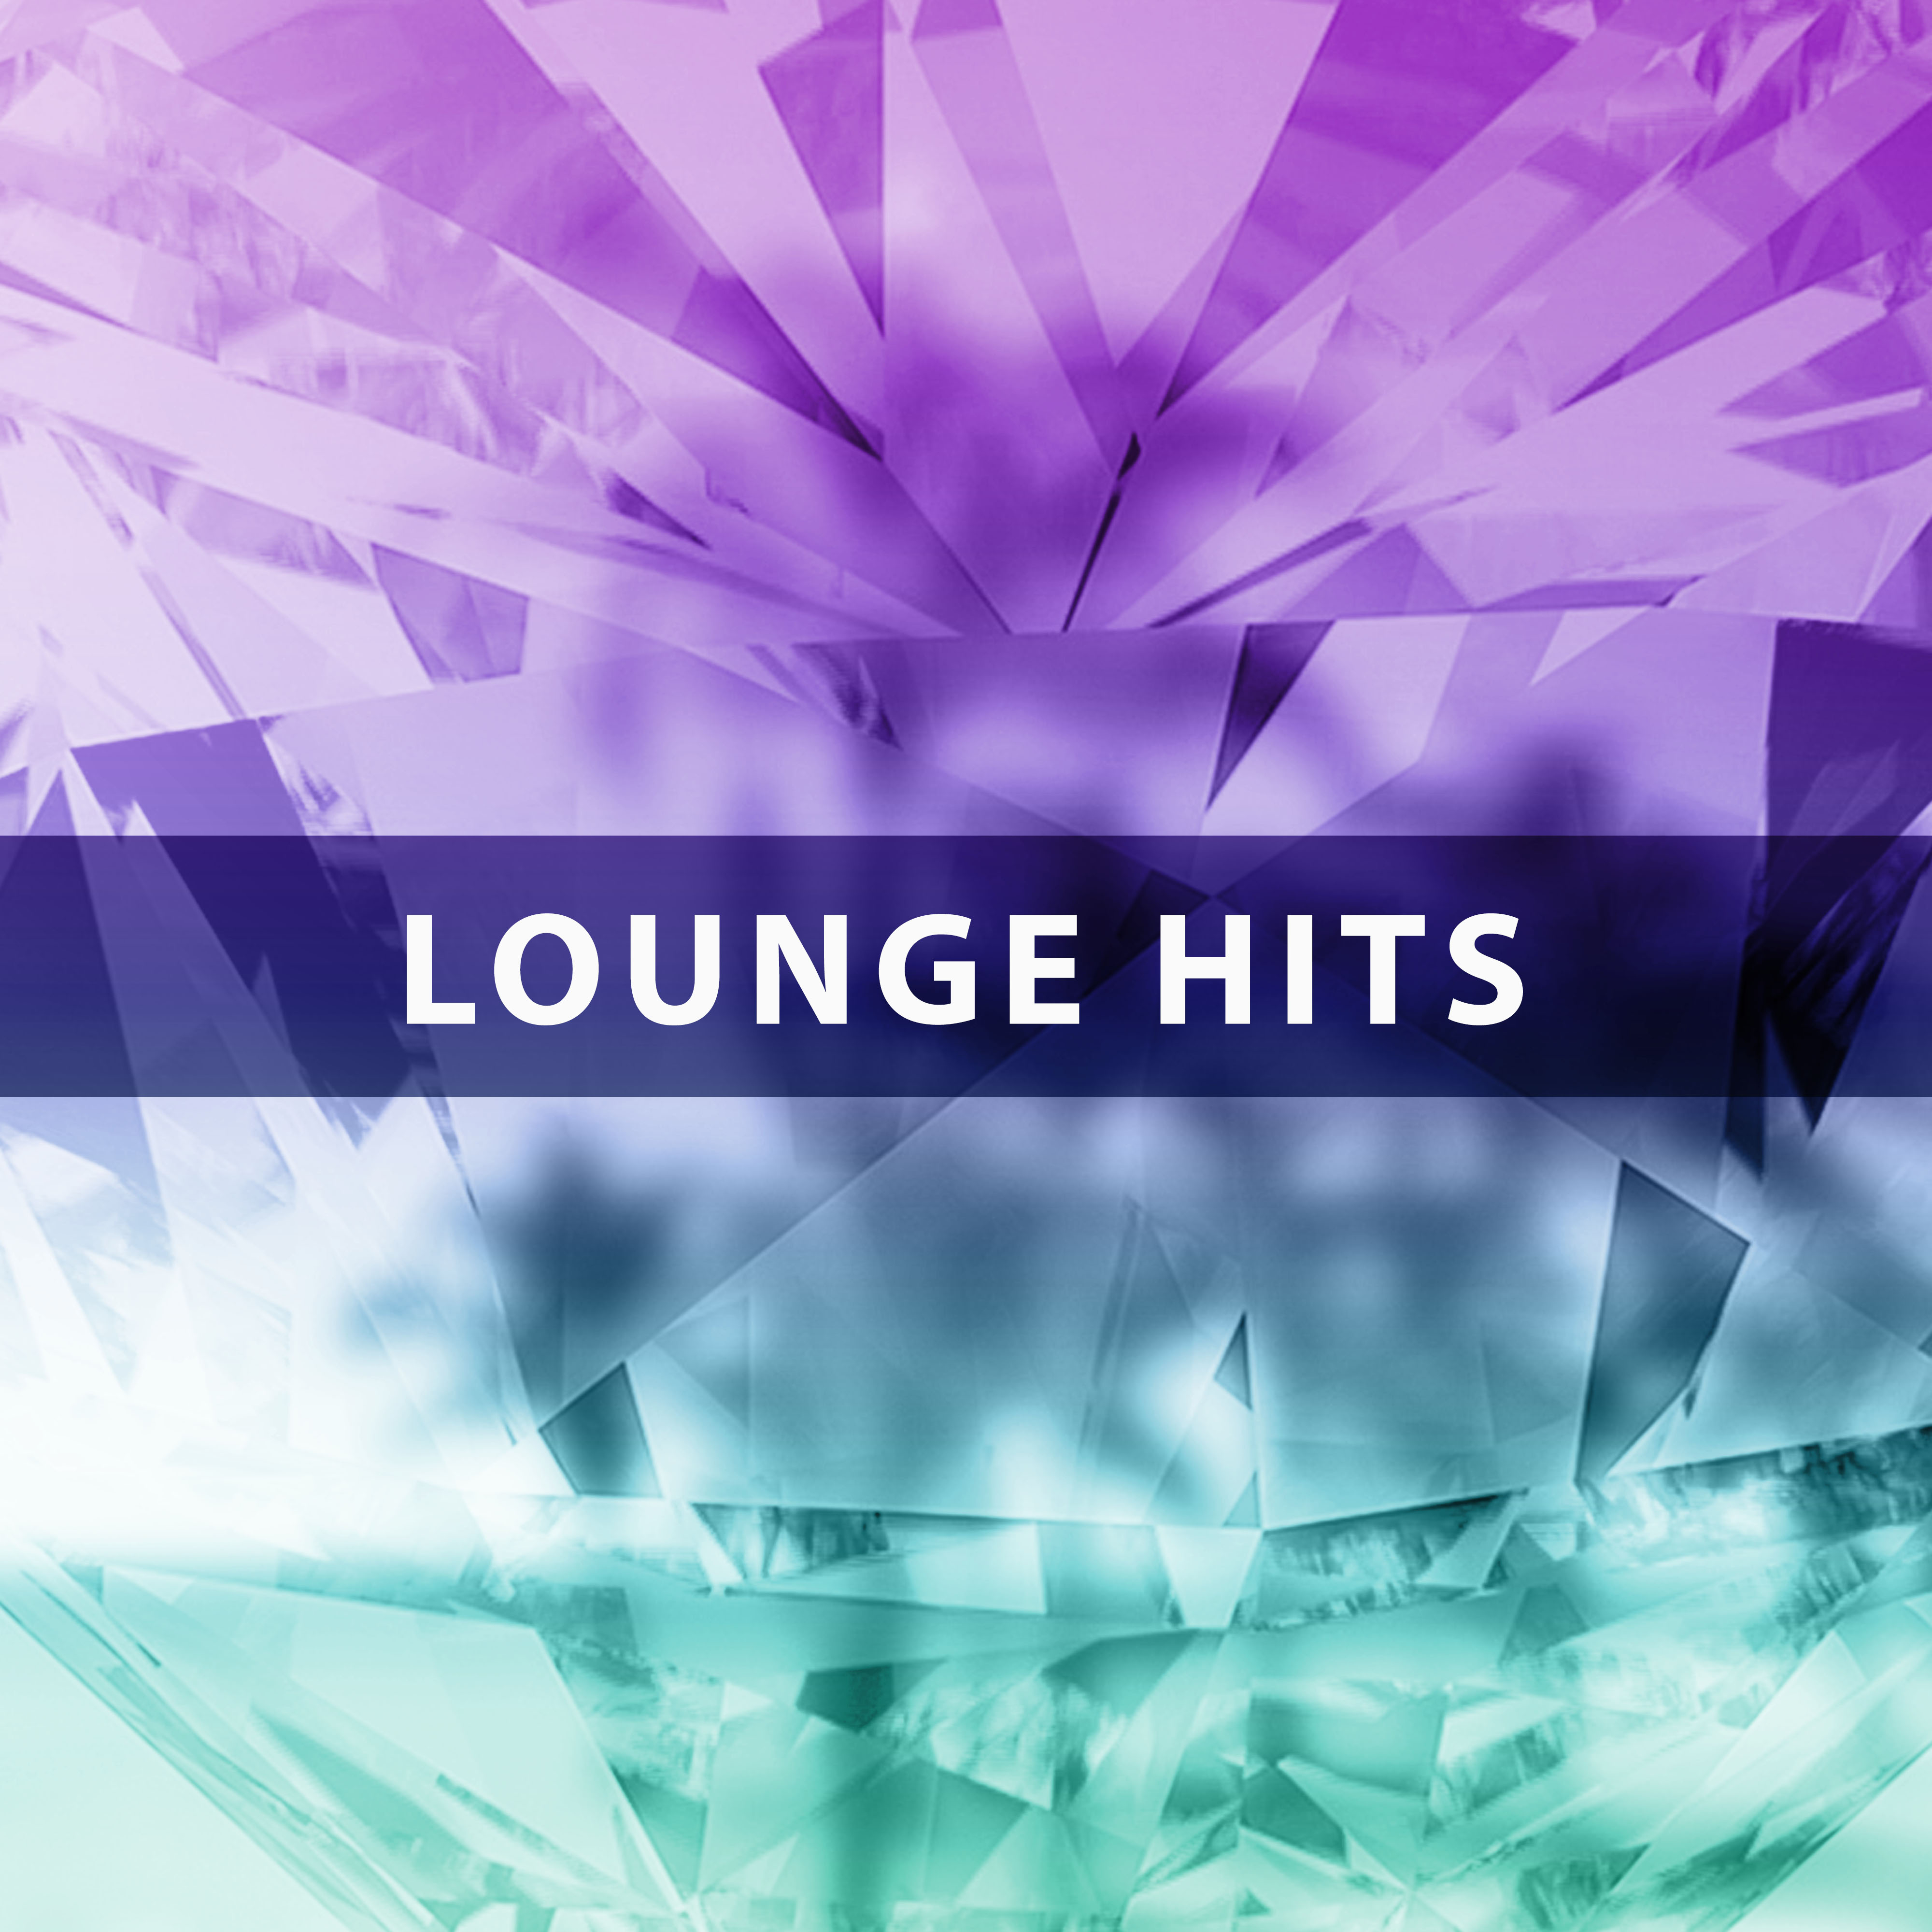 Lounge Hits – Chill Out Music for Dance, Party and Summertime